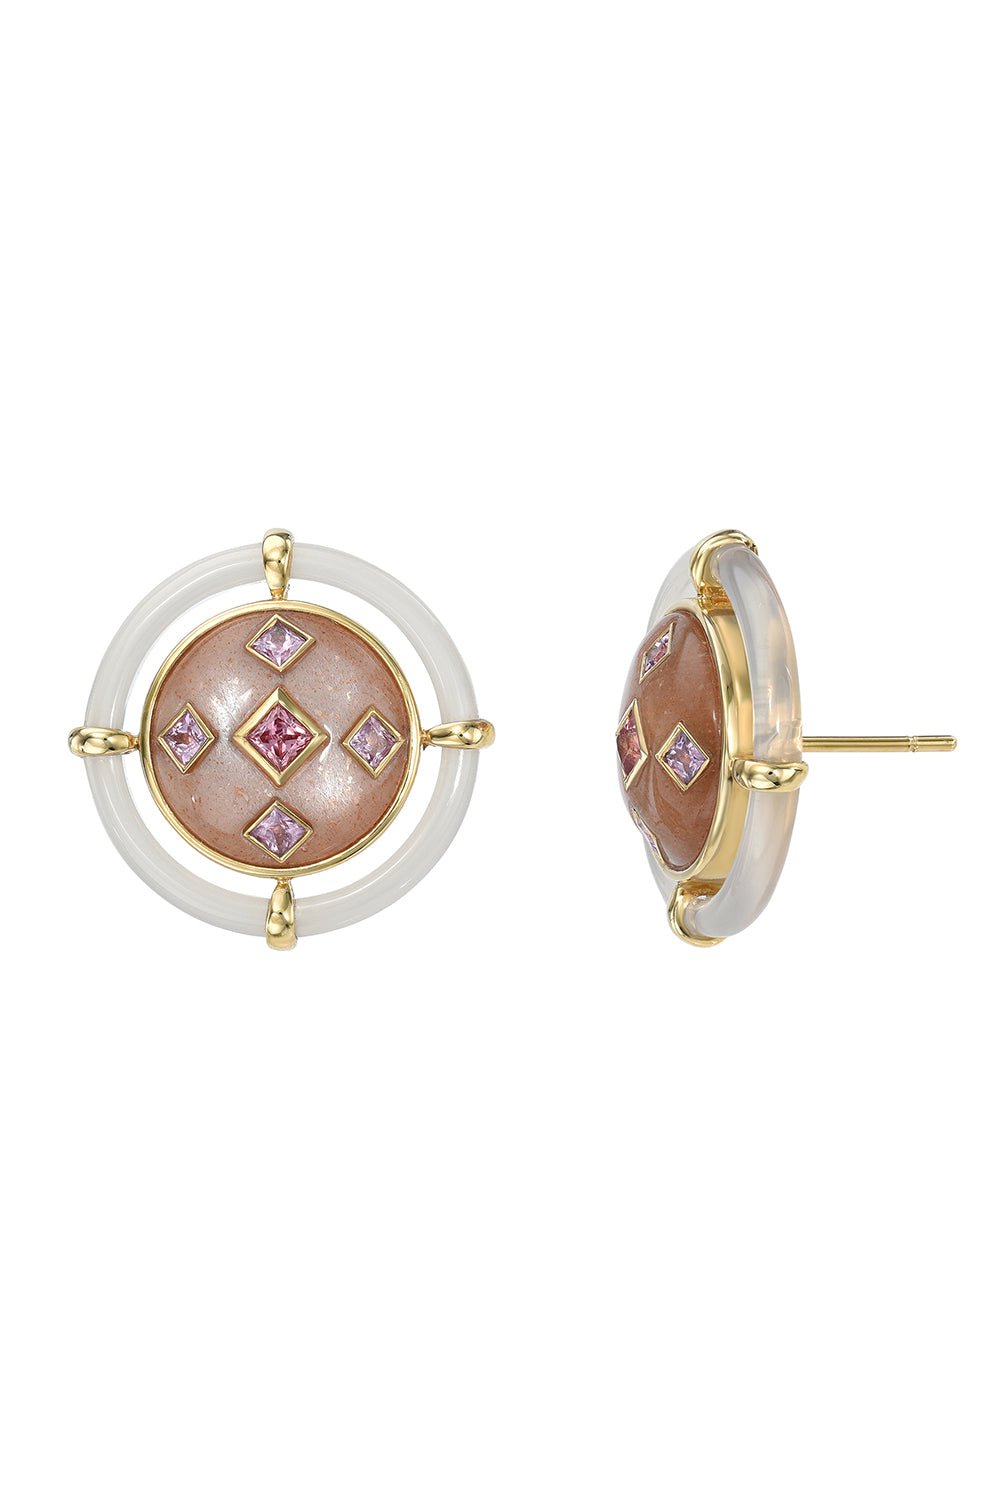 MEREDITH YOUNG-Orbit Sunset Earrings-YELLOW GOLD